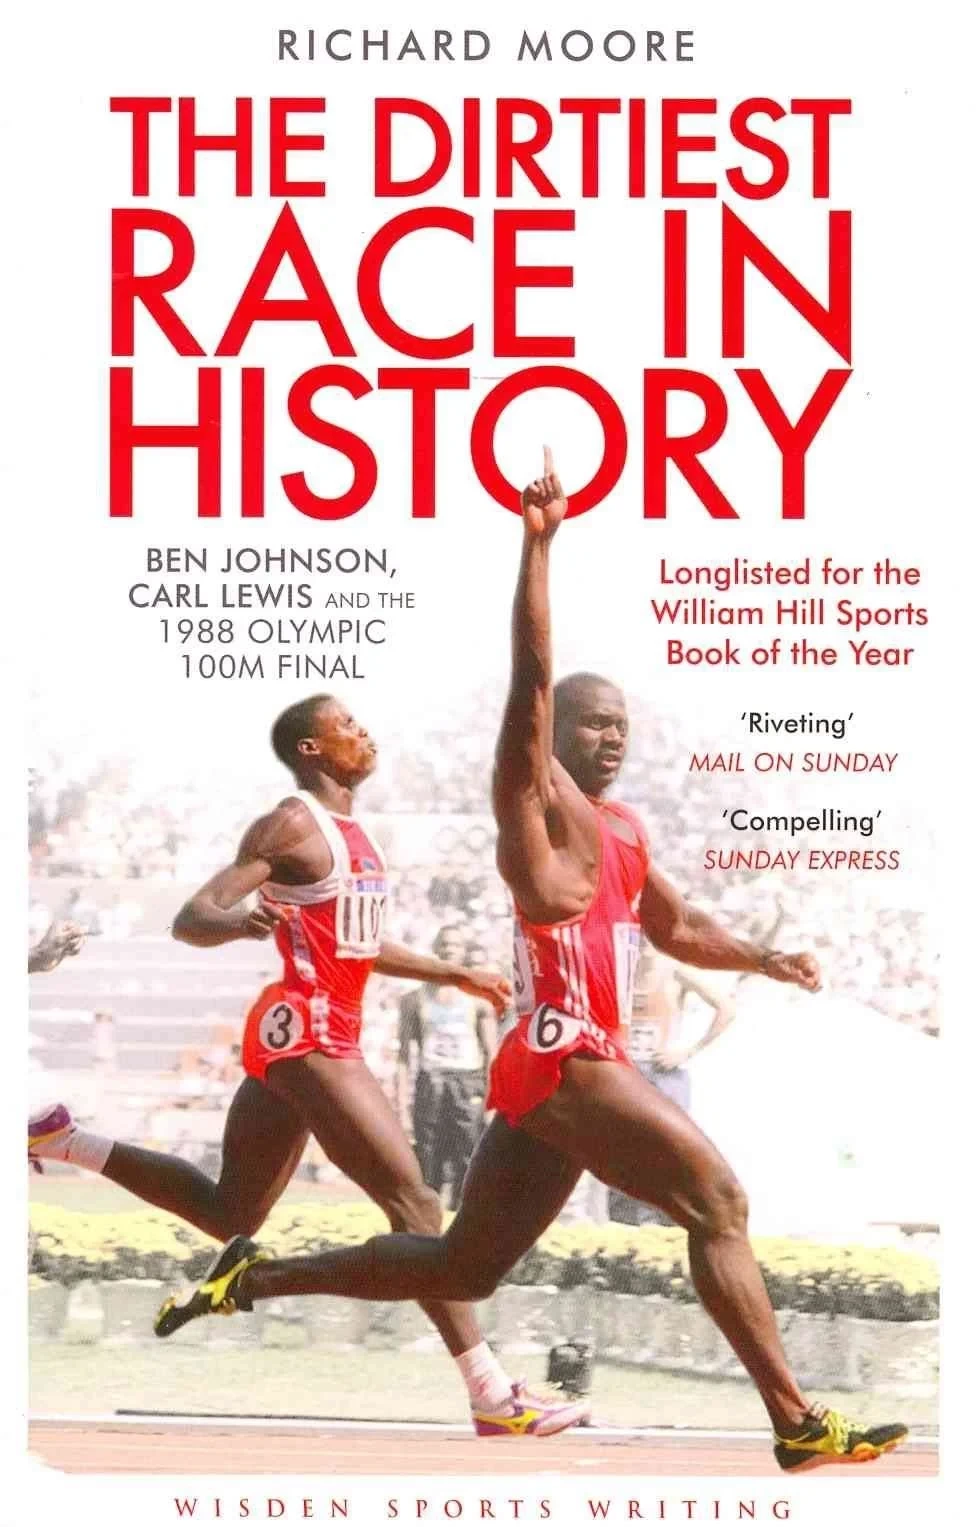 Richard Moore, who died unexpectedly last month, wrote the most comprehensive account of the 1988 Olympic 100m in Seoul ©Wisden Sports Writing